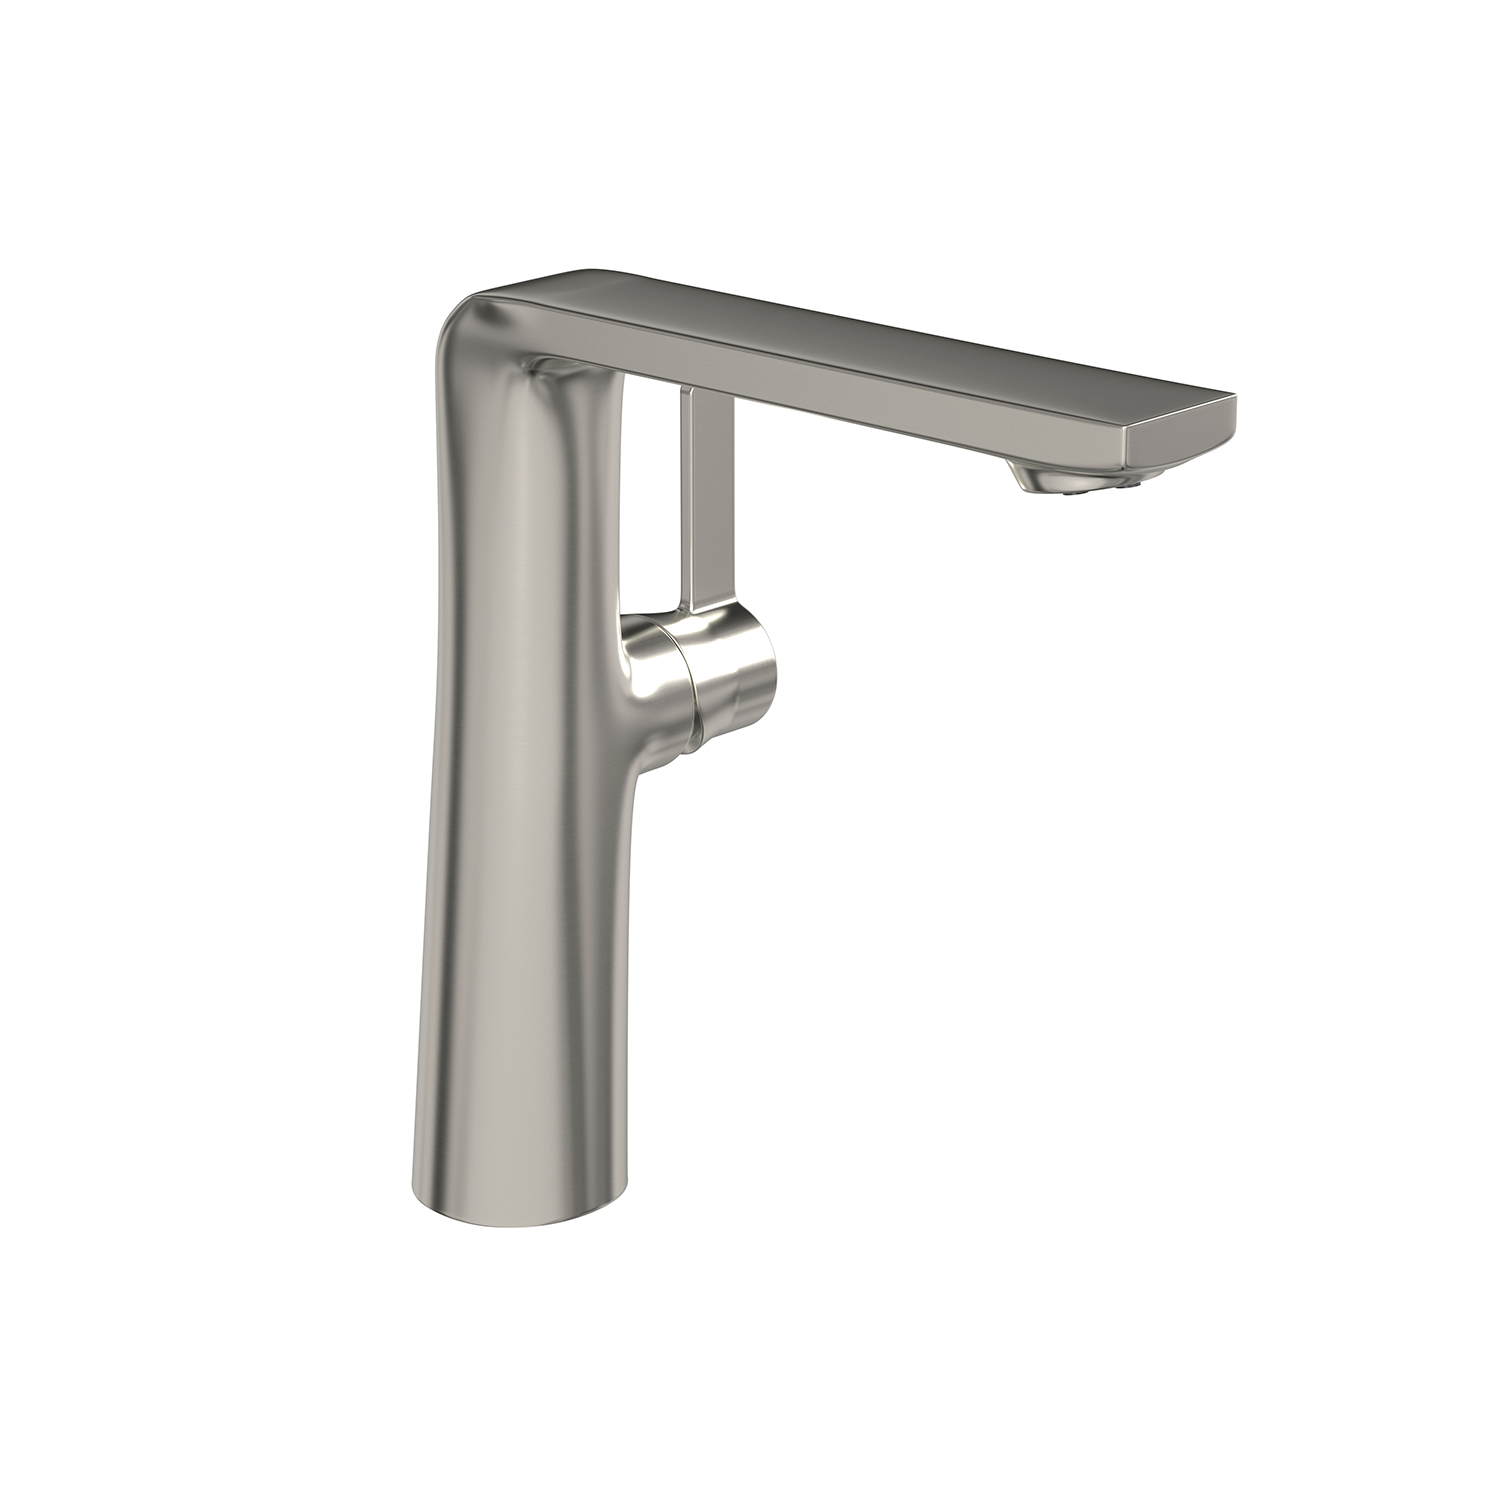 DAX Single Handle Bathroom Vessel Sink Faucet, Brass Body, Chrome Finish, Spout Height 8-3/4 Inches (DAX-8226A)